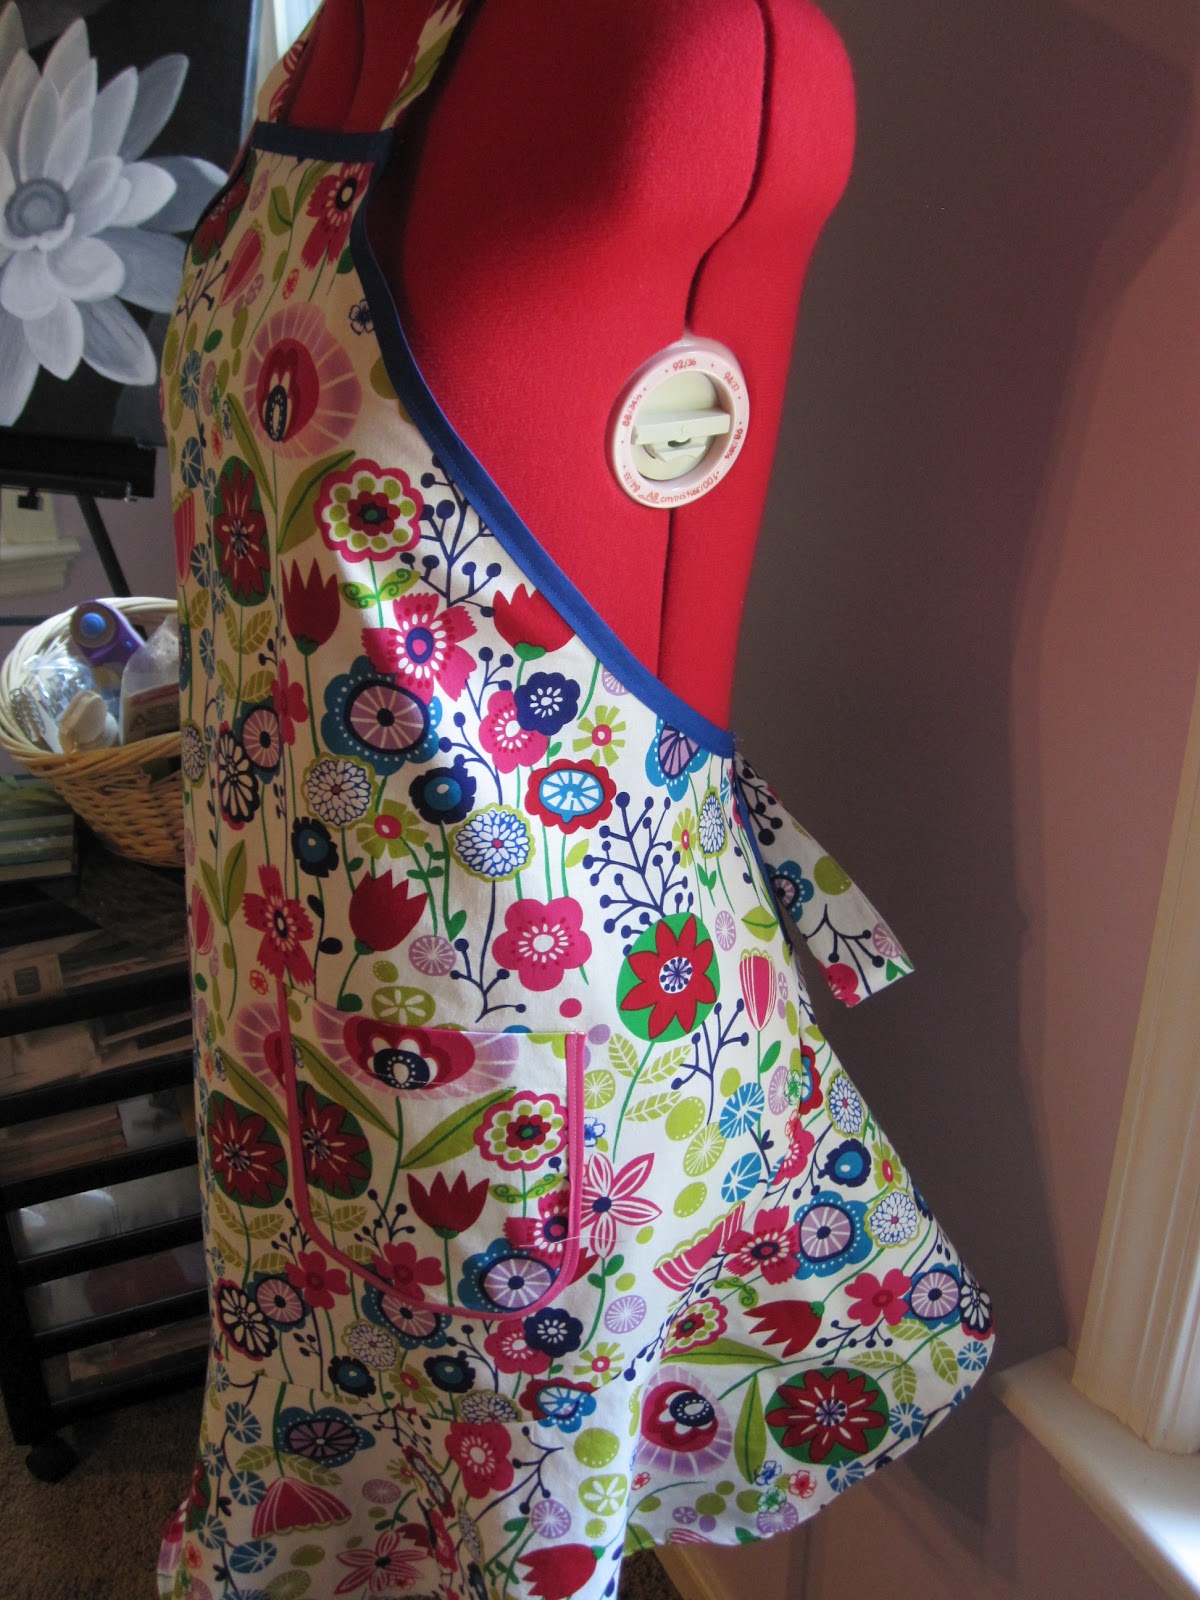 Kelly's Knack: an Apron for Gretchen